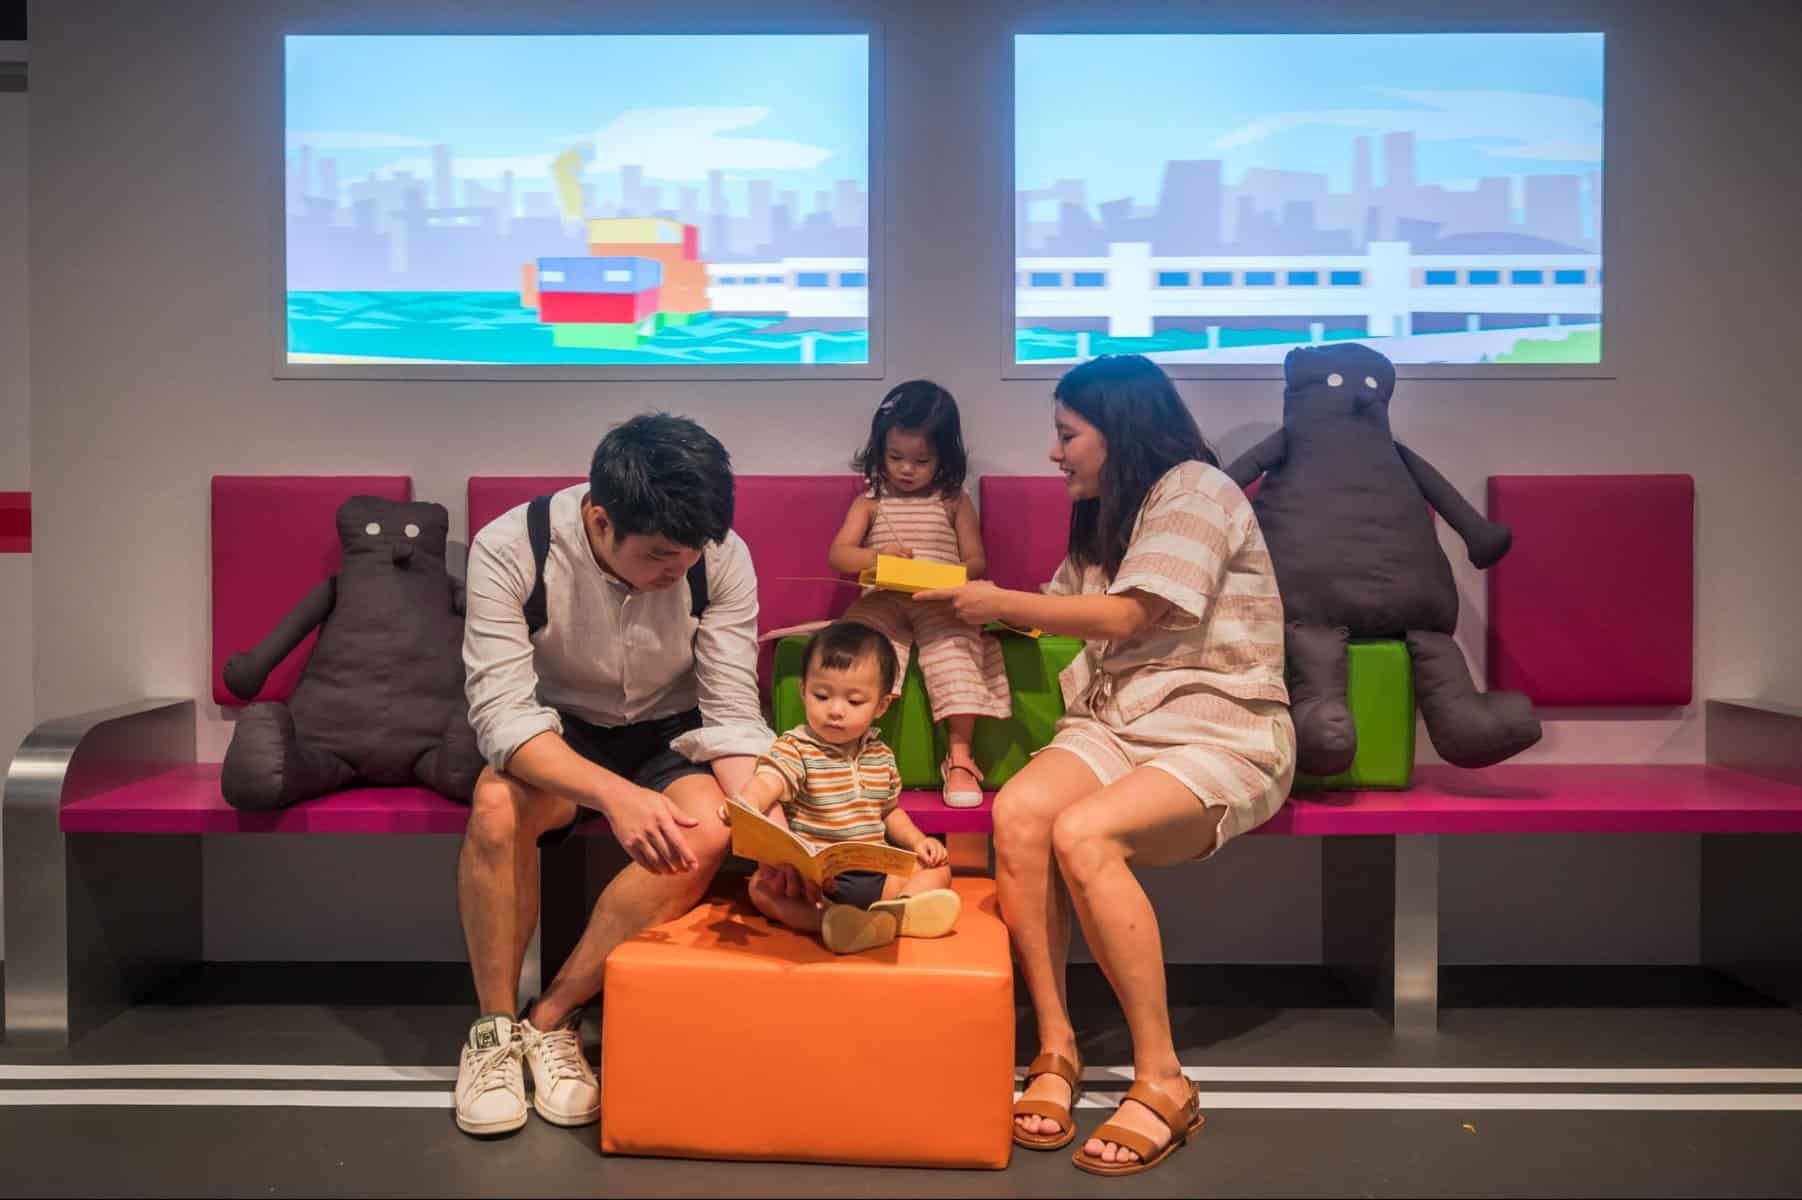 We Move This City by Chiang Yu Xiang, 2023. Created for Gallery Children’s Biennale 2023: Let’s Make a Better Place. Image courtesy of the National Gallery Singapore.